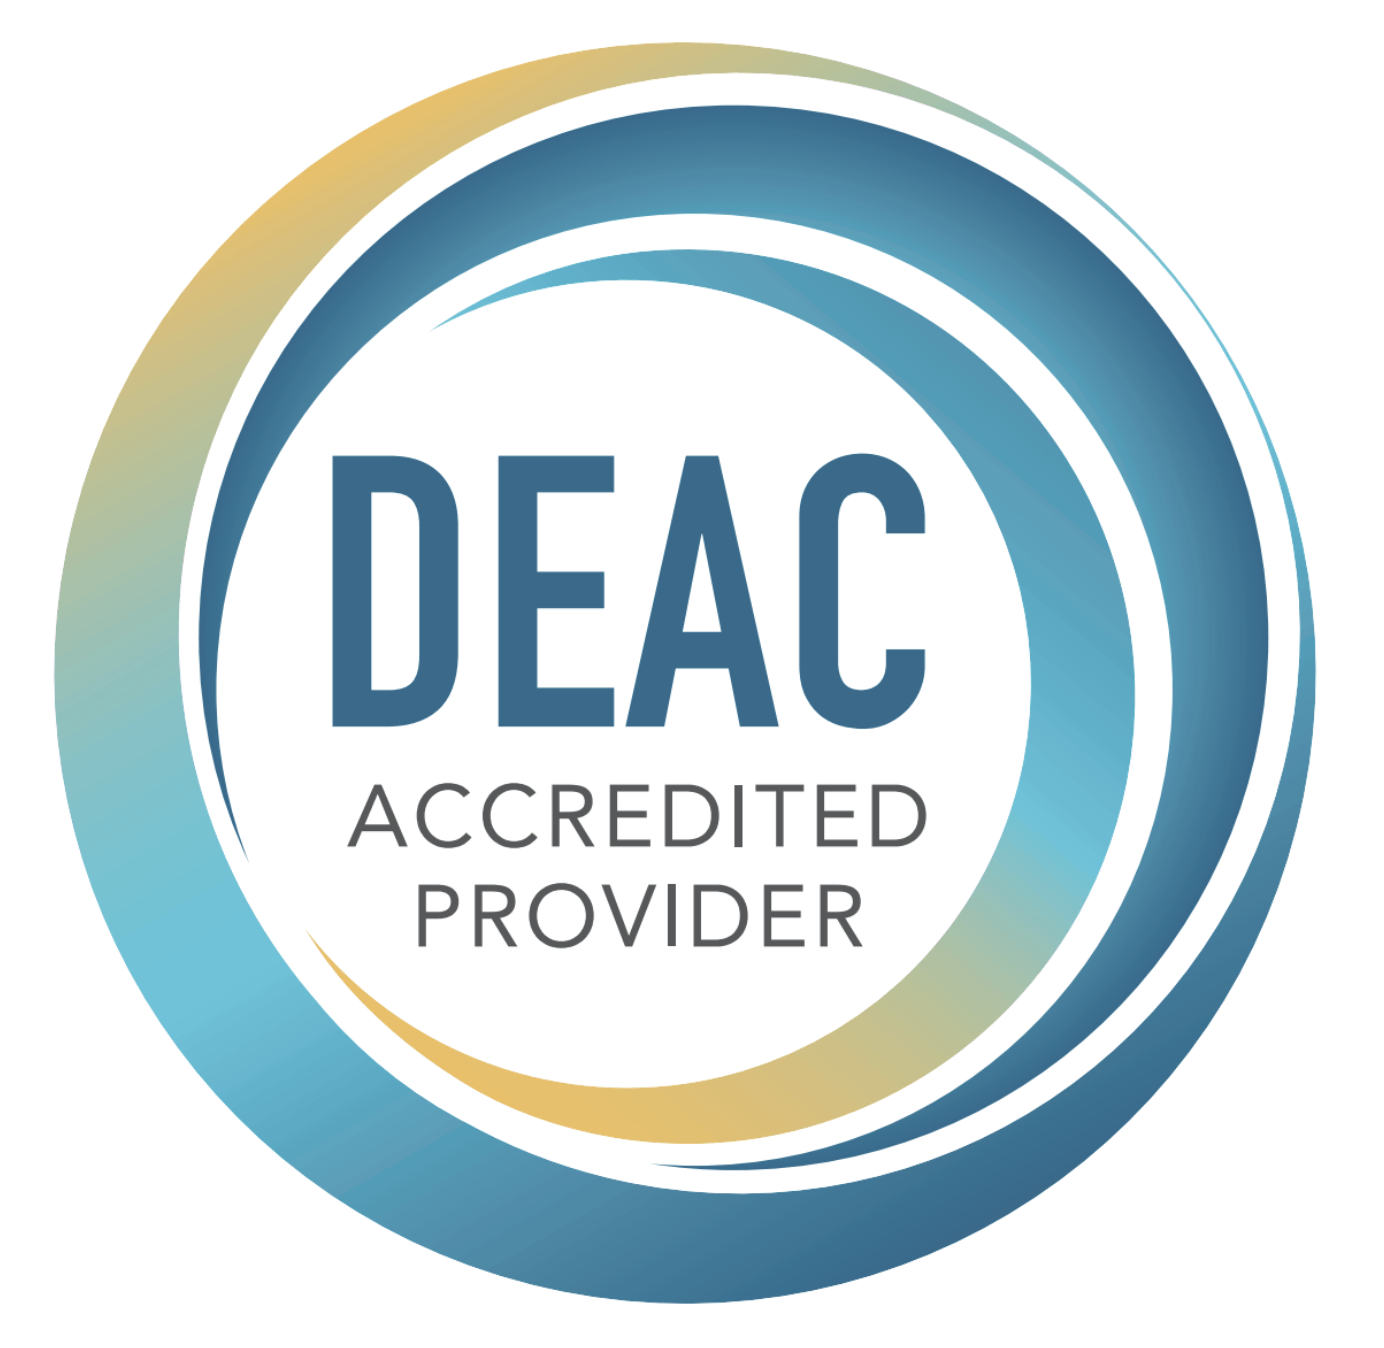 AADFA training has been formally accredited by the Dental Education Accreditation Committee